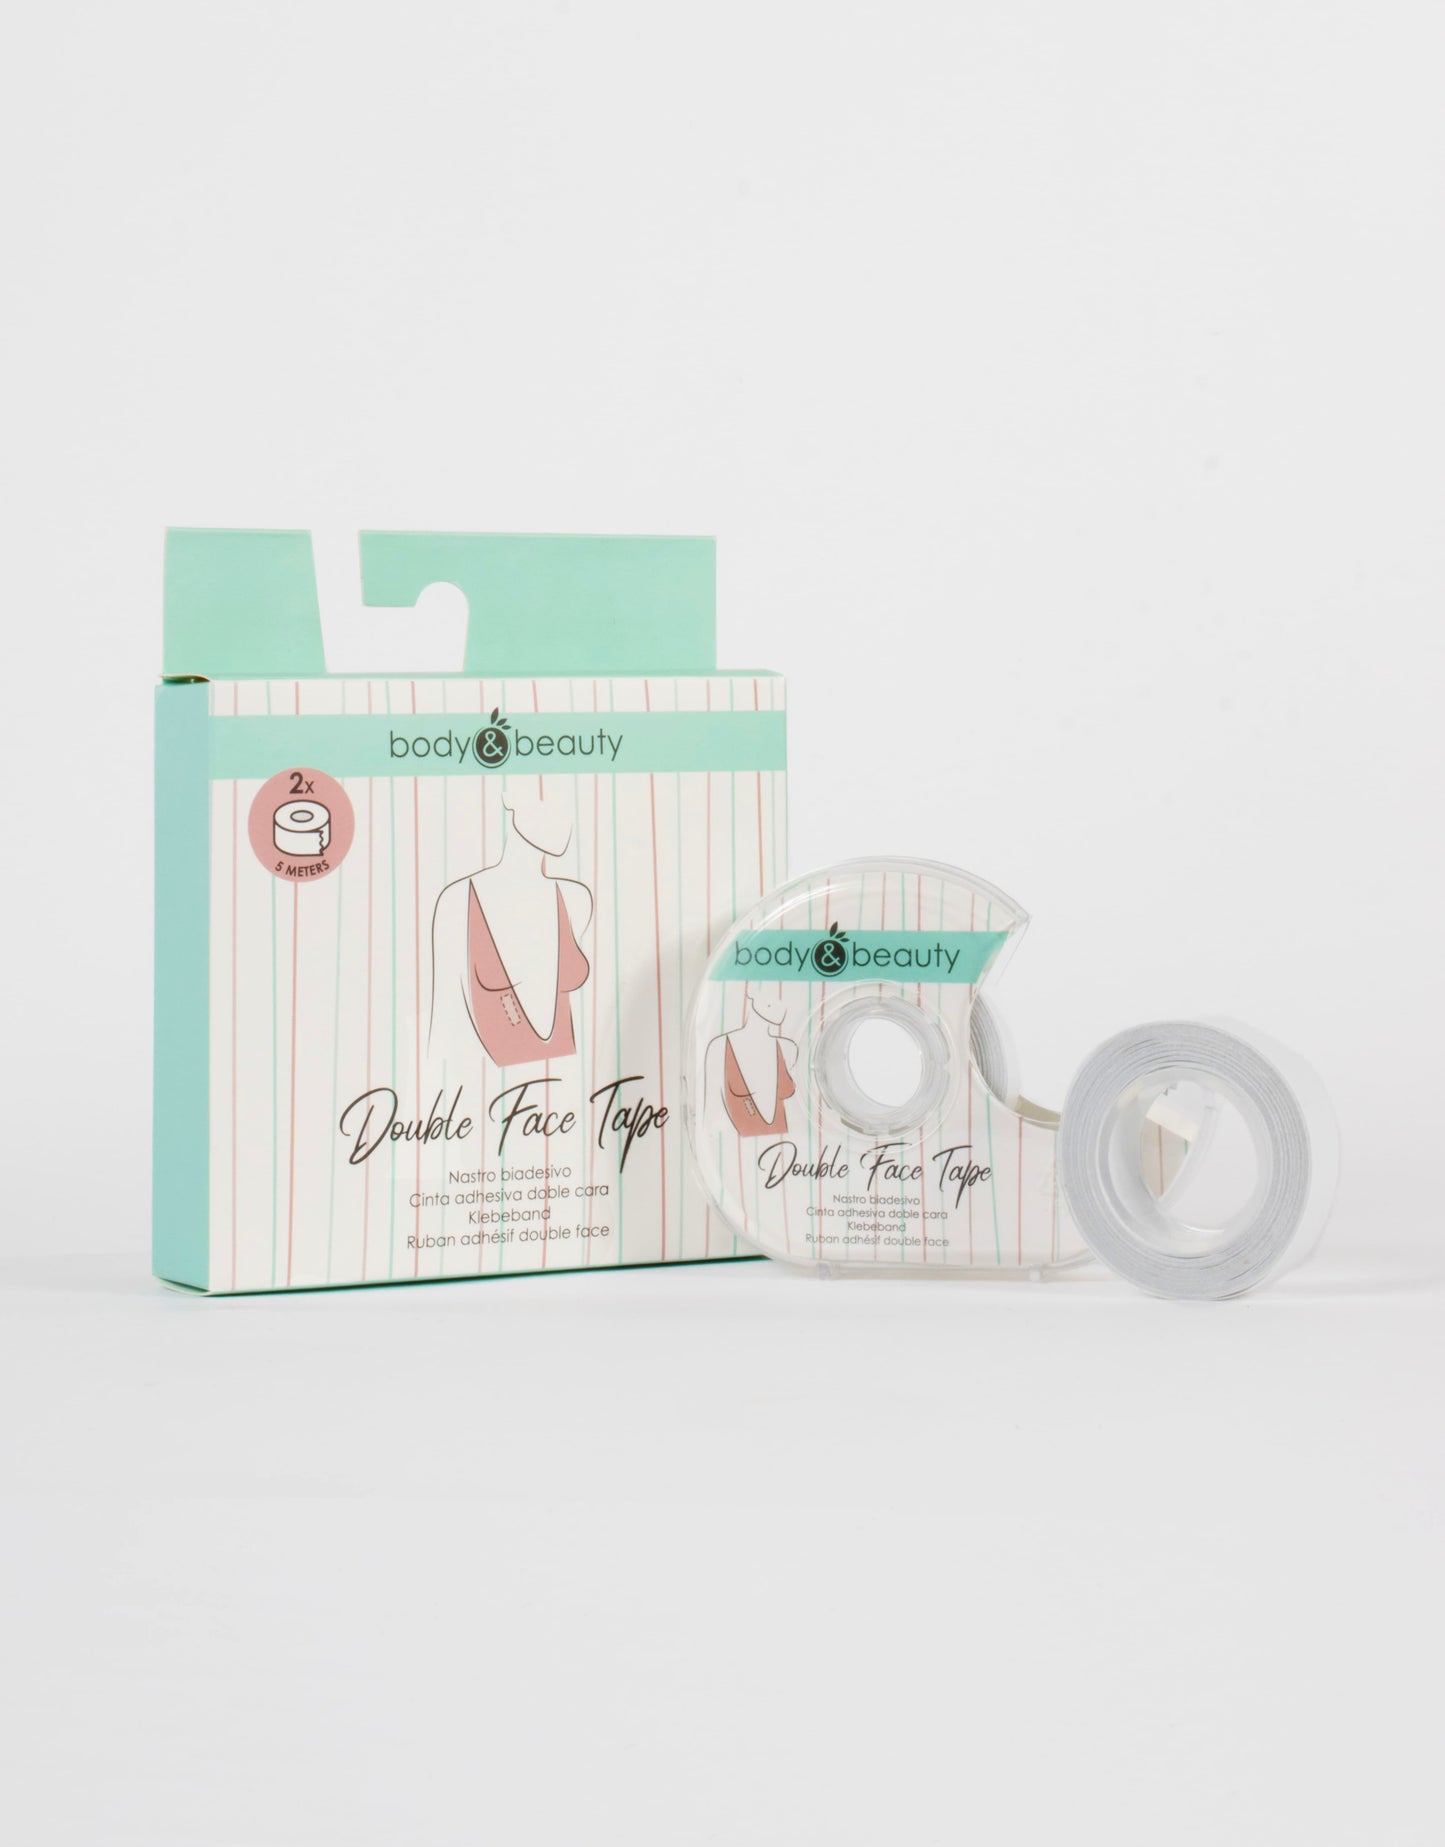 Body & Beauty Double Face Tape - Double sided sticky body tape made of soft fabric that is delicate but long lasting adhesive. It is perfect for securing clothes to the skin to help prevent your garment from moving out of place. It comes with two 5 meter rolls and a dispenser.